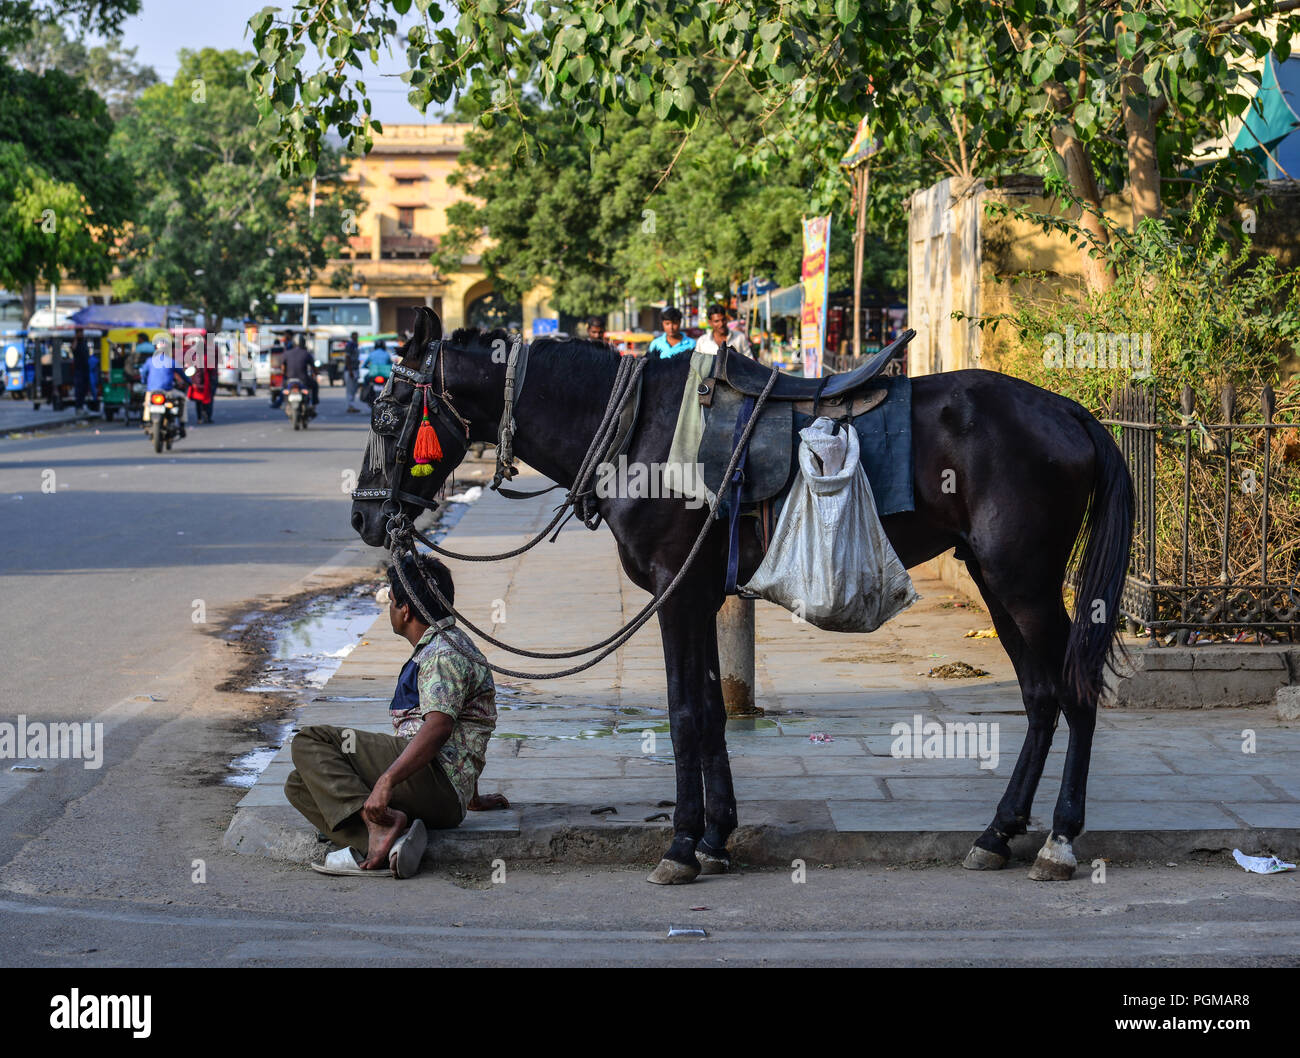 Jaipur, India - Nov 3, 2017. A black mule on street in Jaipur, India. Auto rickshaws are used in cities and towns for short distances. Stock Photo